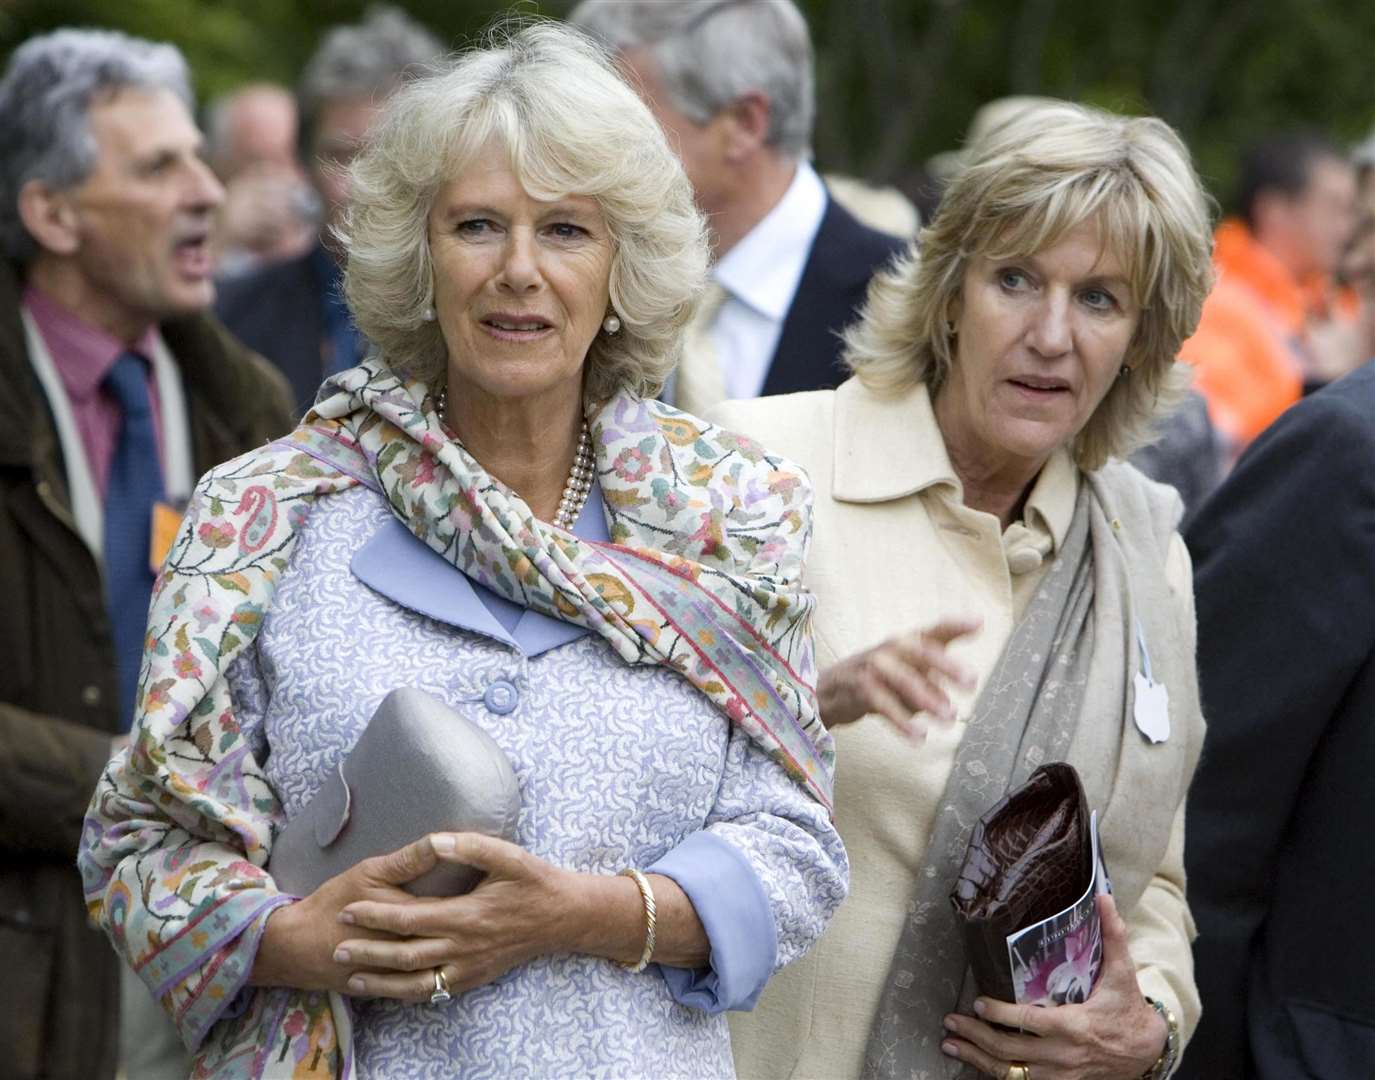 Camilla with her sister Annabel Elliot at the Chelsea Flower Show (Michael Dunlea/PA)